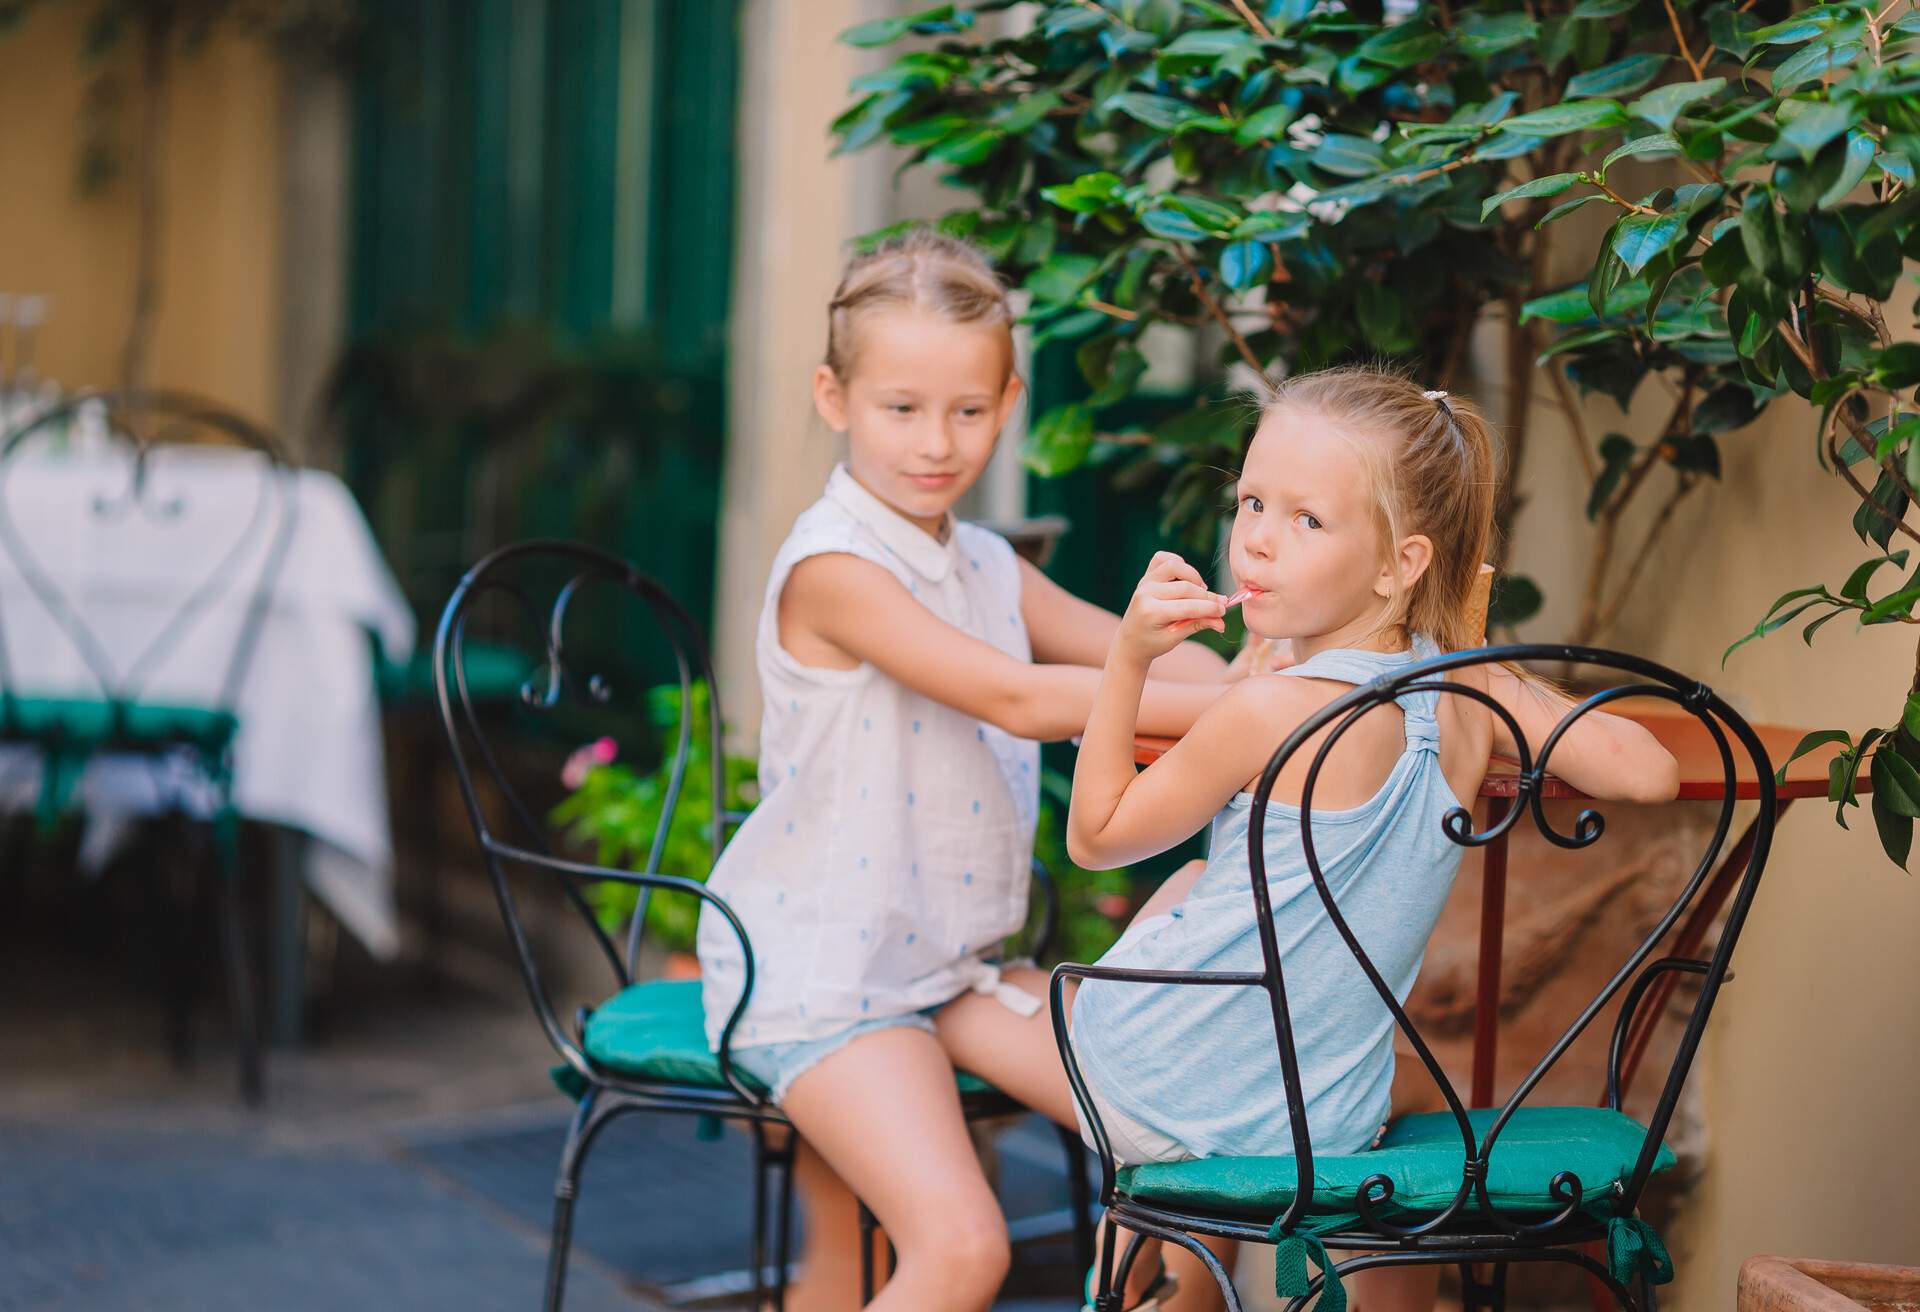 DEST_ITALY_TUSCANY_THEME_PEOPLE_KIDS_ICECREAM_CAFE_GettyImages-1389528642